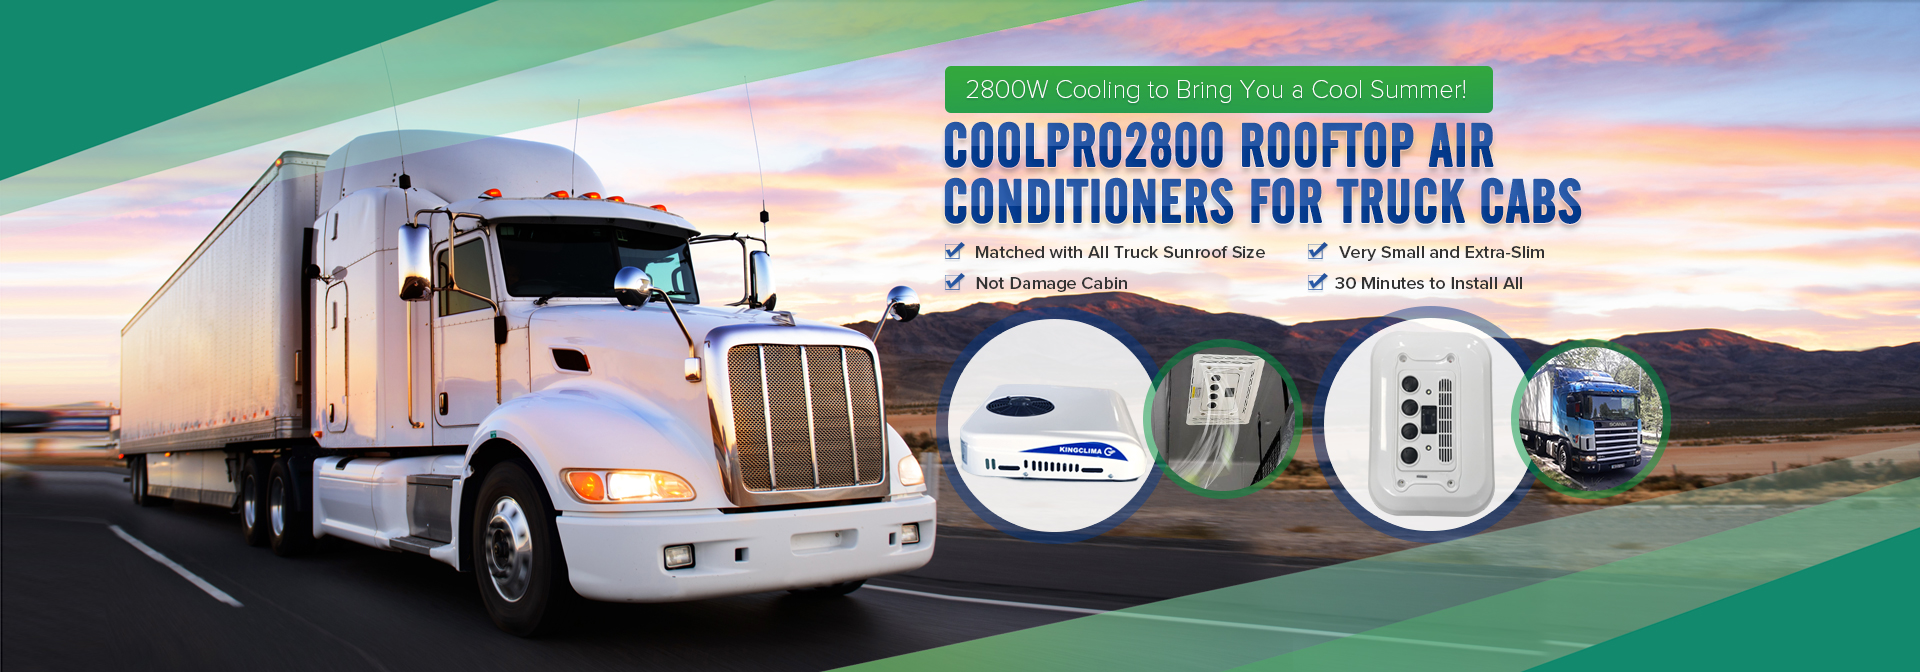 CoolPro2800 sleeper cab air conditioner